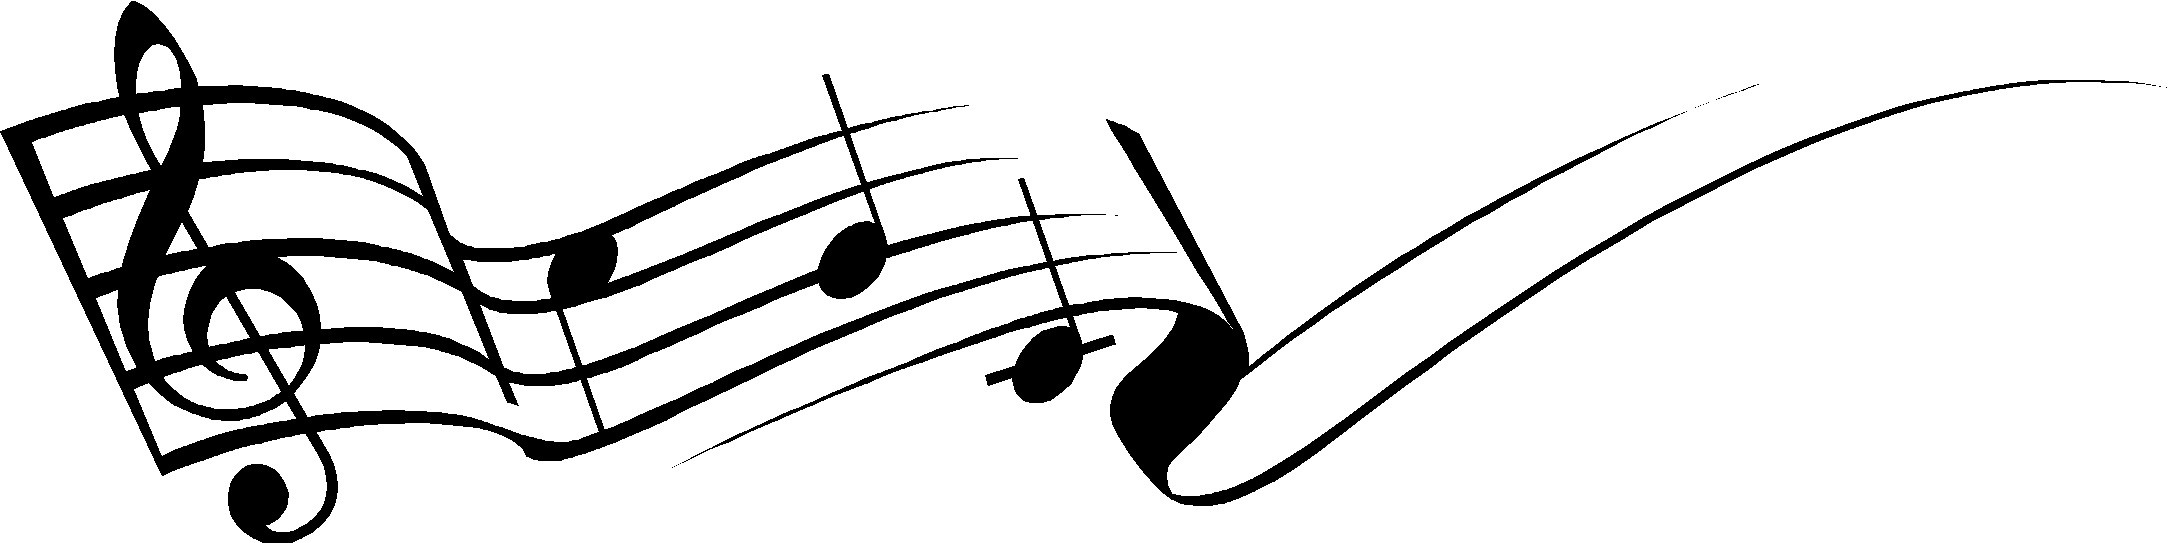 music-notes-border-clipart-free-download-on-clipartmag